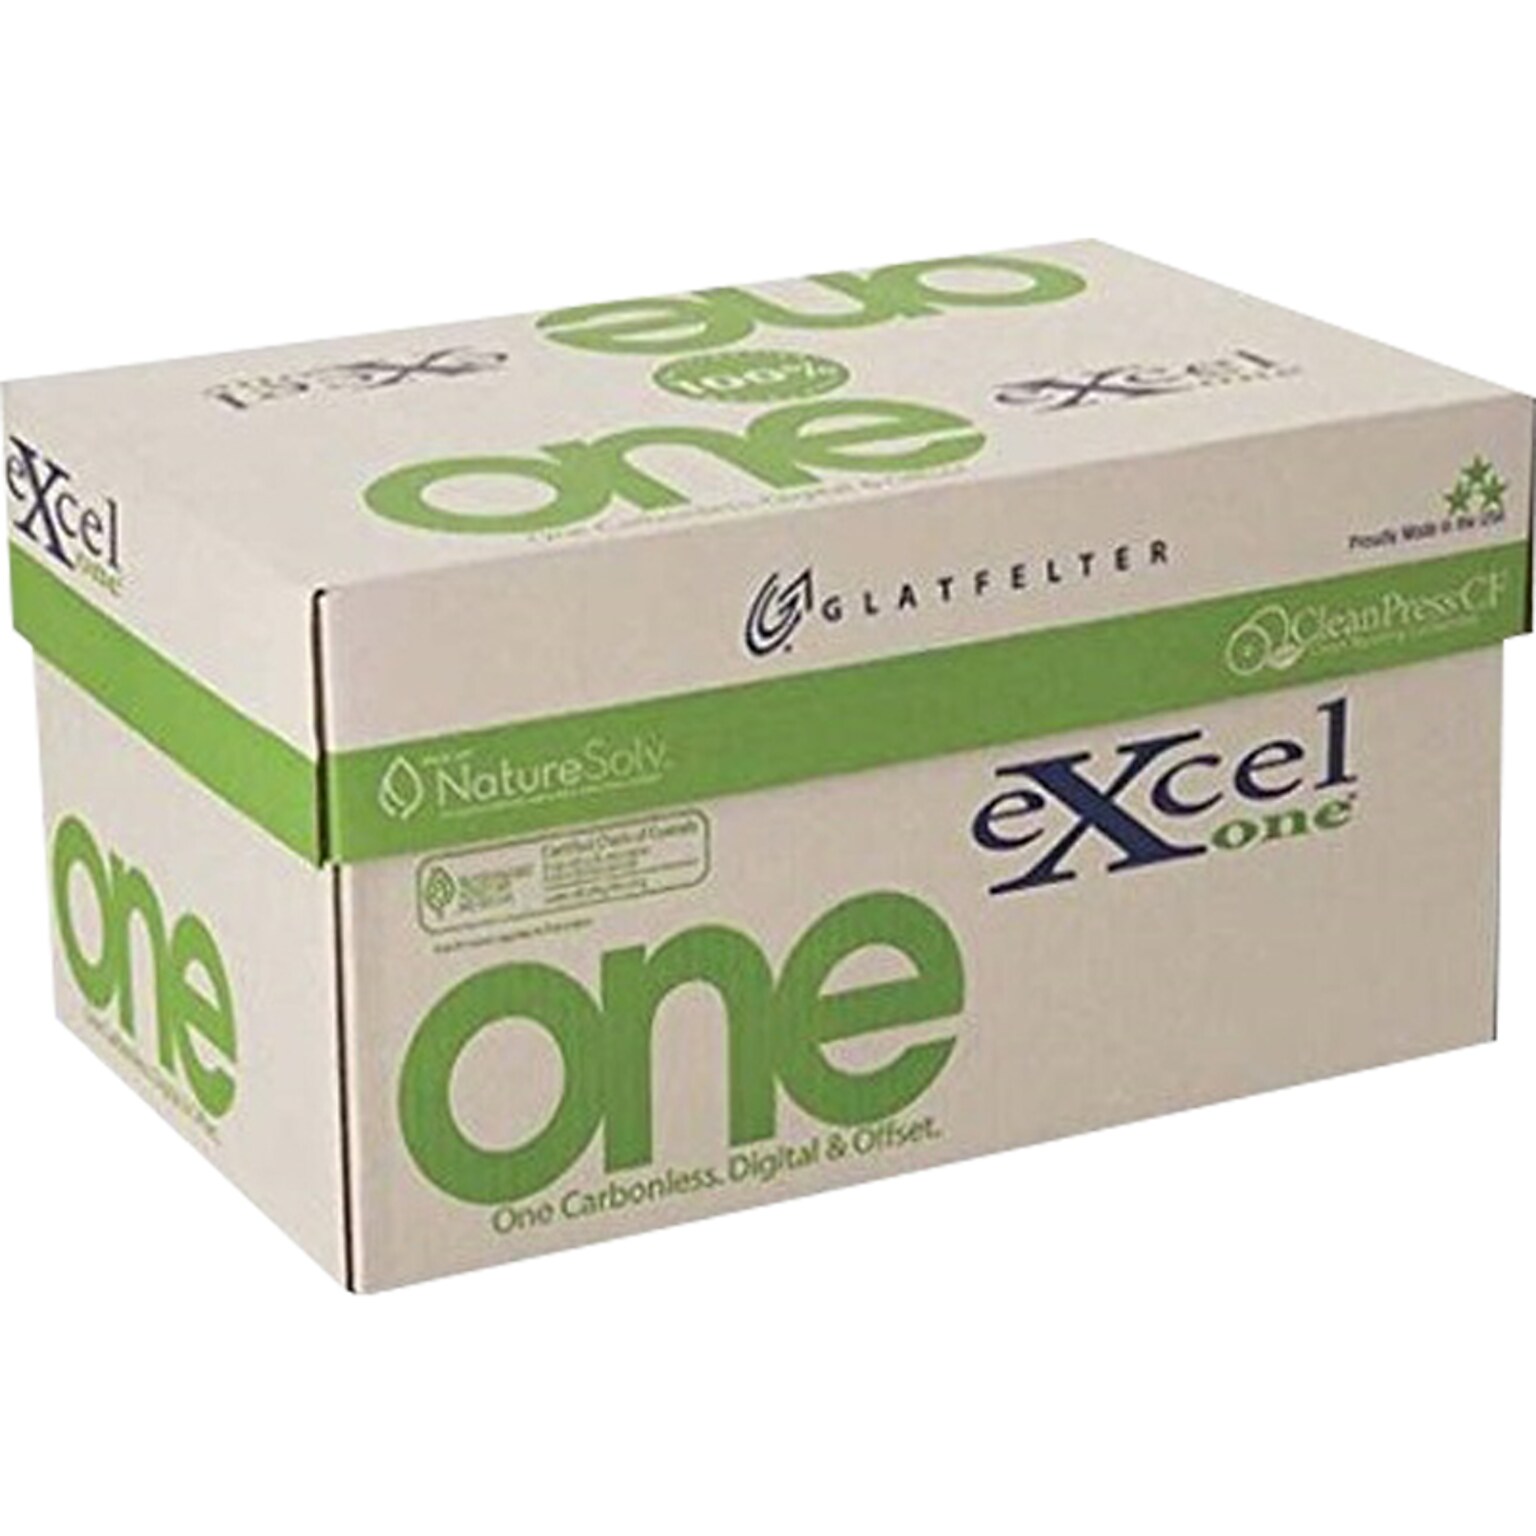 ExcelOne 8.5 x 11 Carbonless Paper, 21 lbs., 92 Brightness, 500 Sheets/Ream, 10 Reams/Carton (232157)